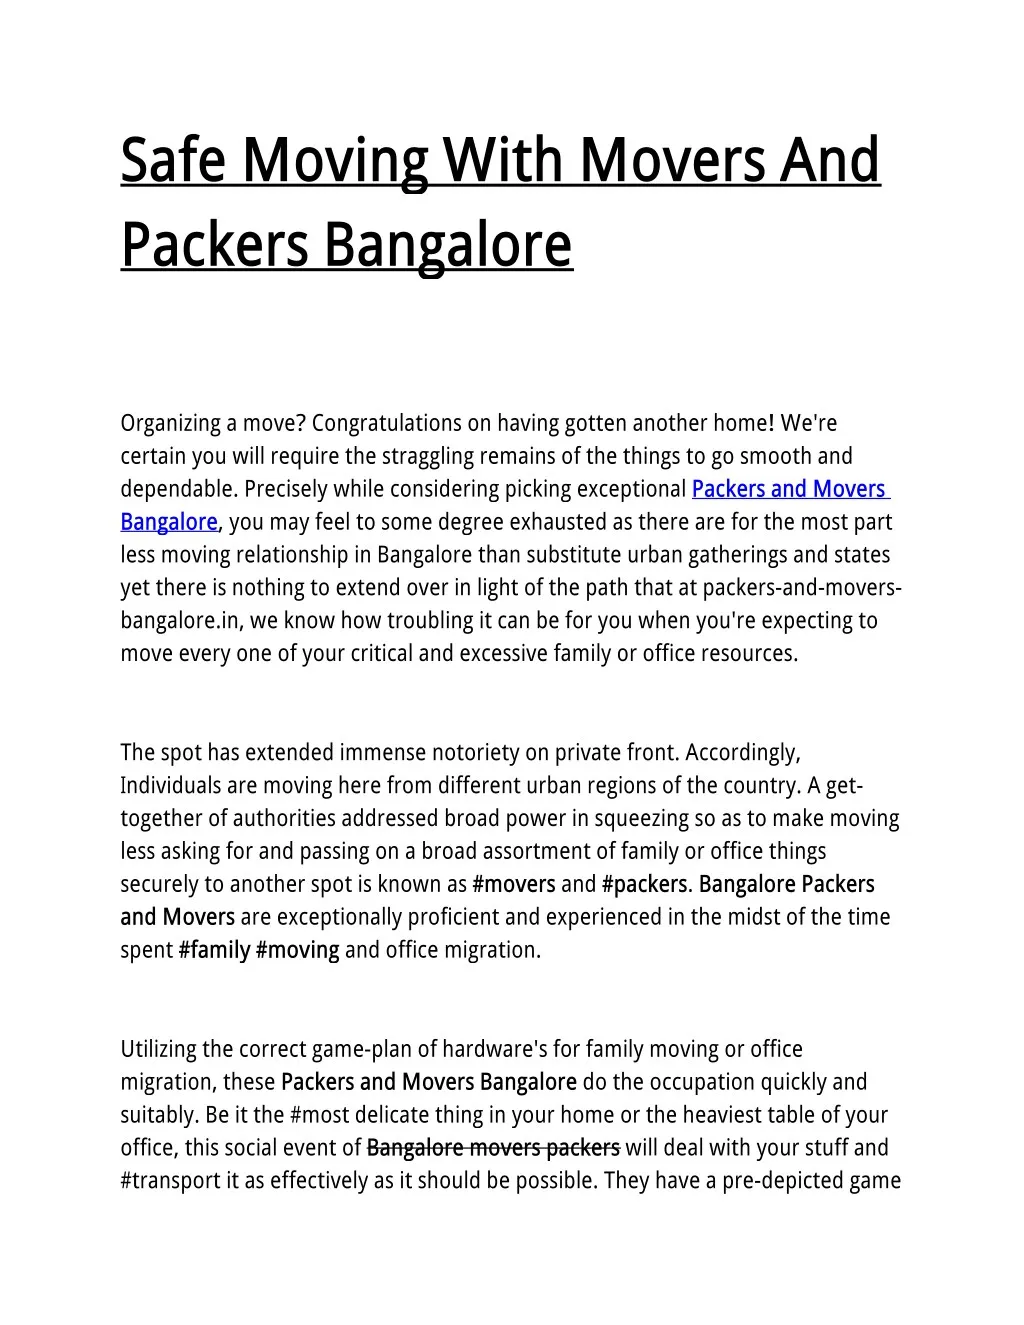 safe moving with movers and packers bangalore